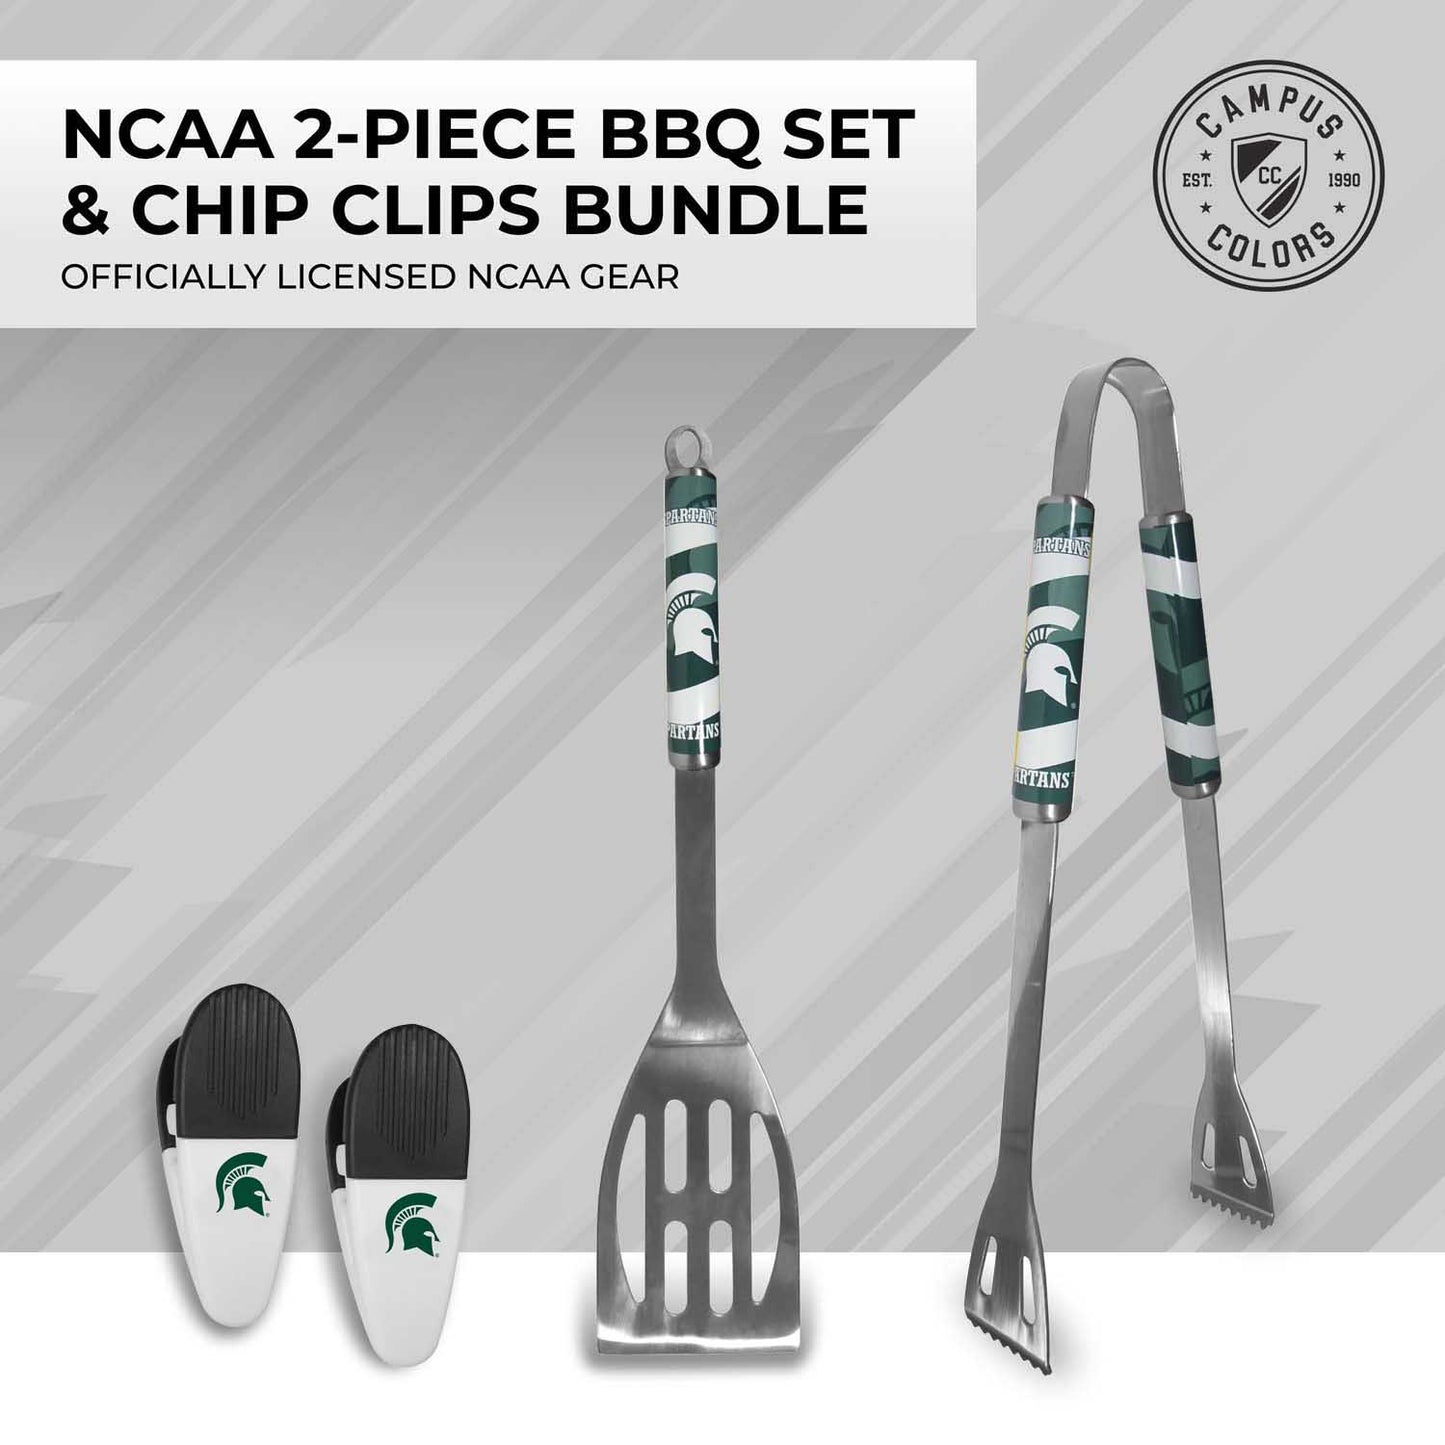 Michigan State Spartans Collegiate University Two Piece Grilling Tools Set with 2 Magnet Chip Clips - Chrome